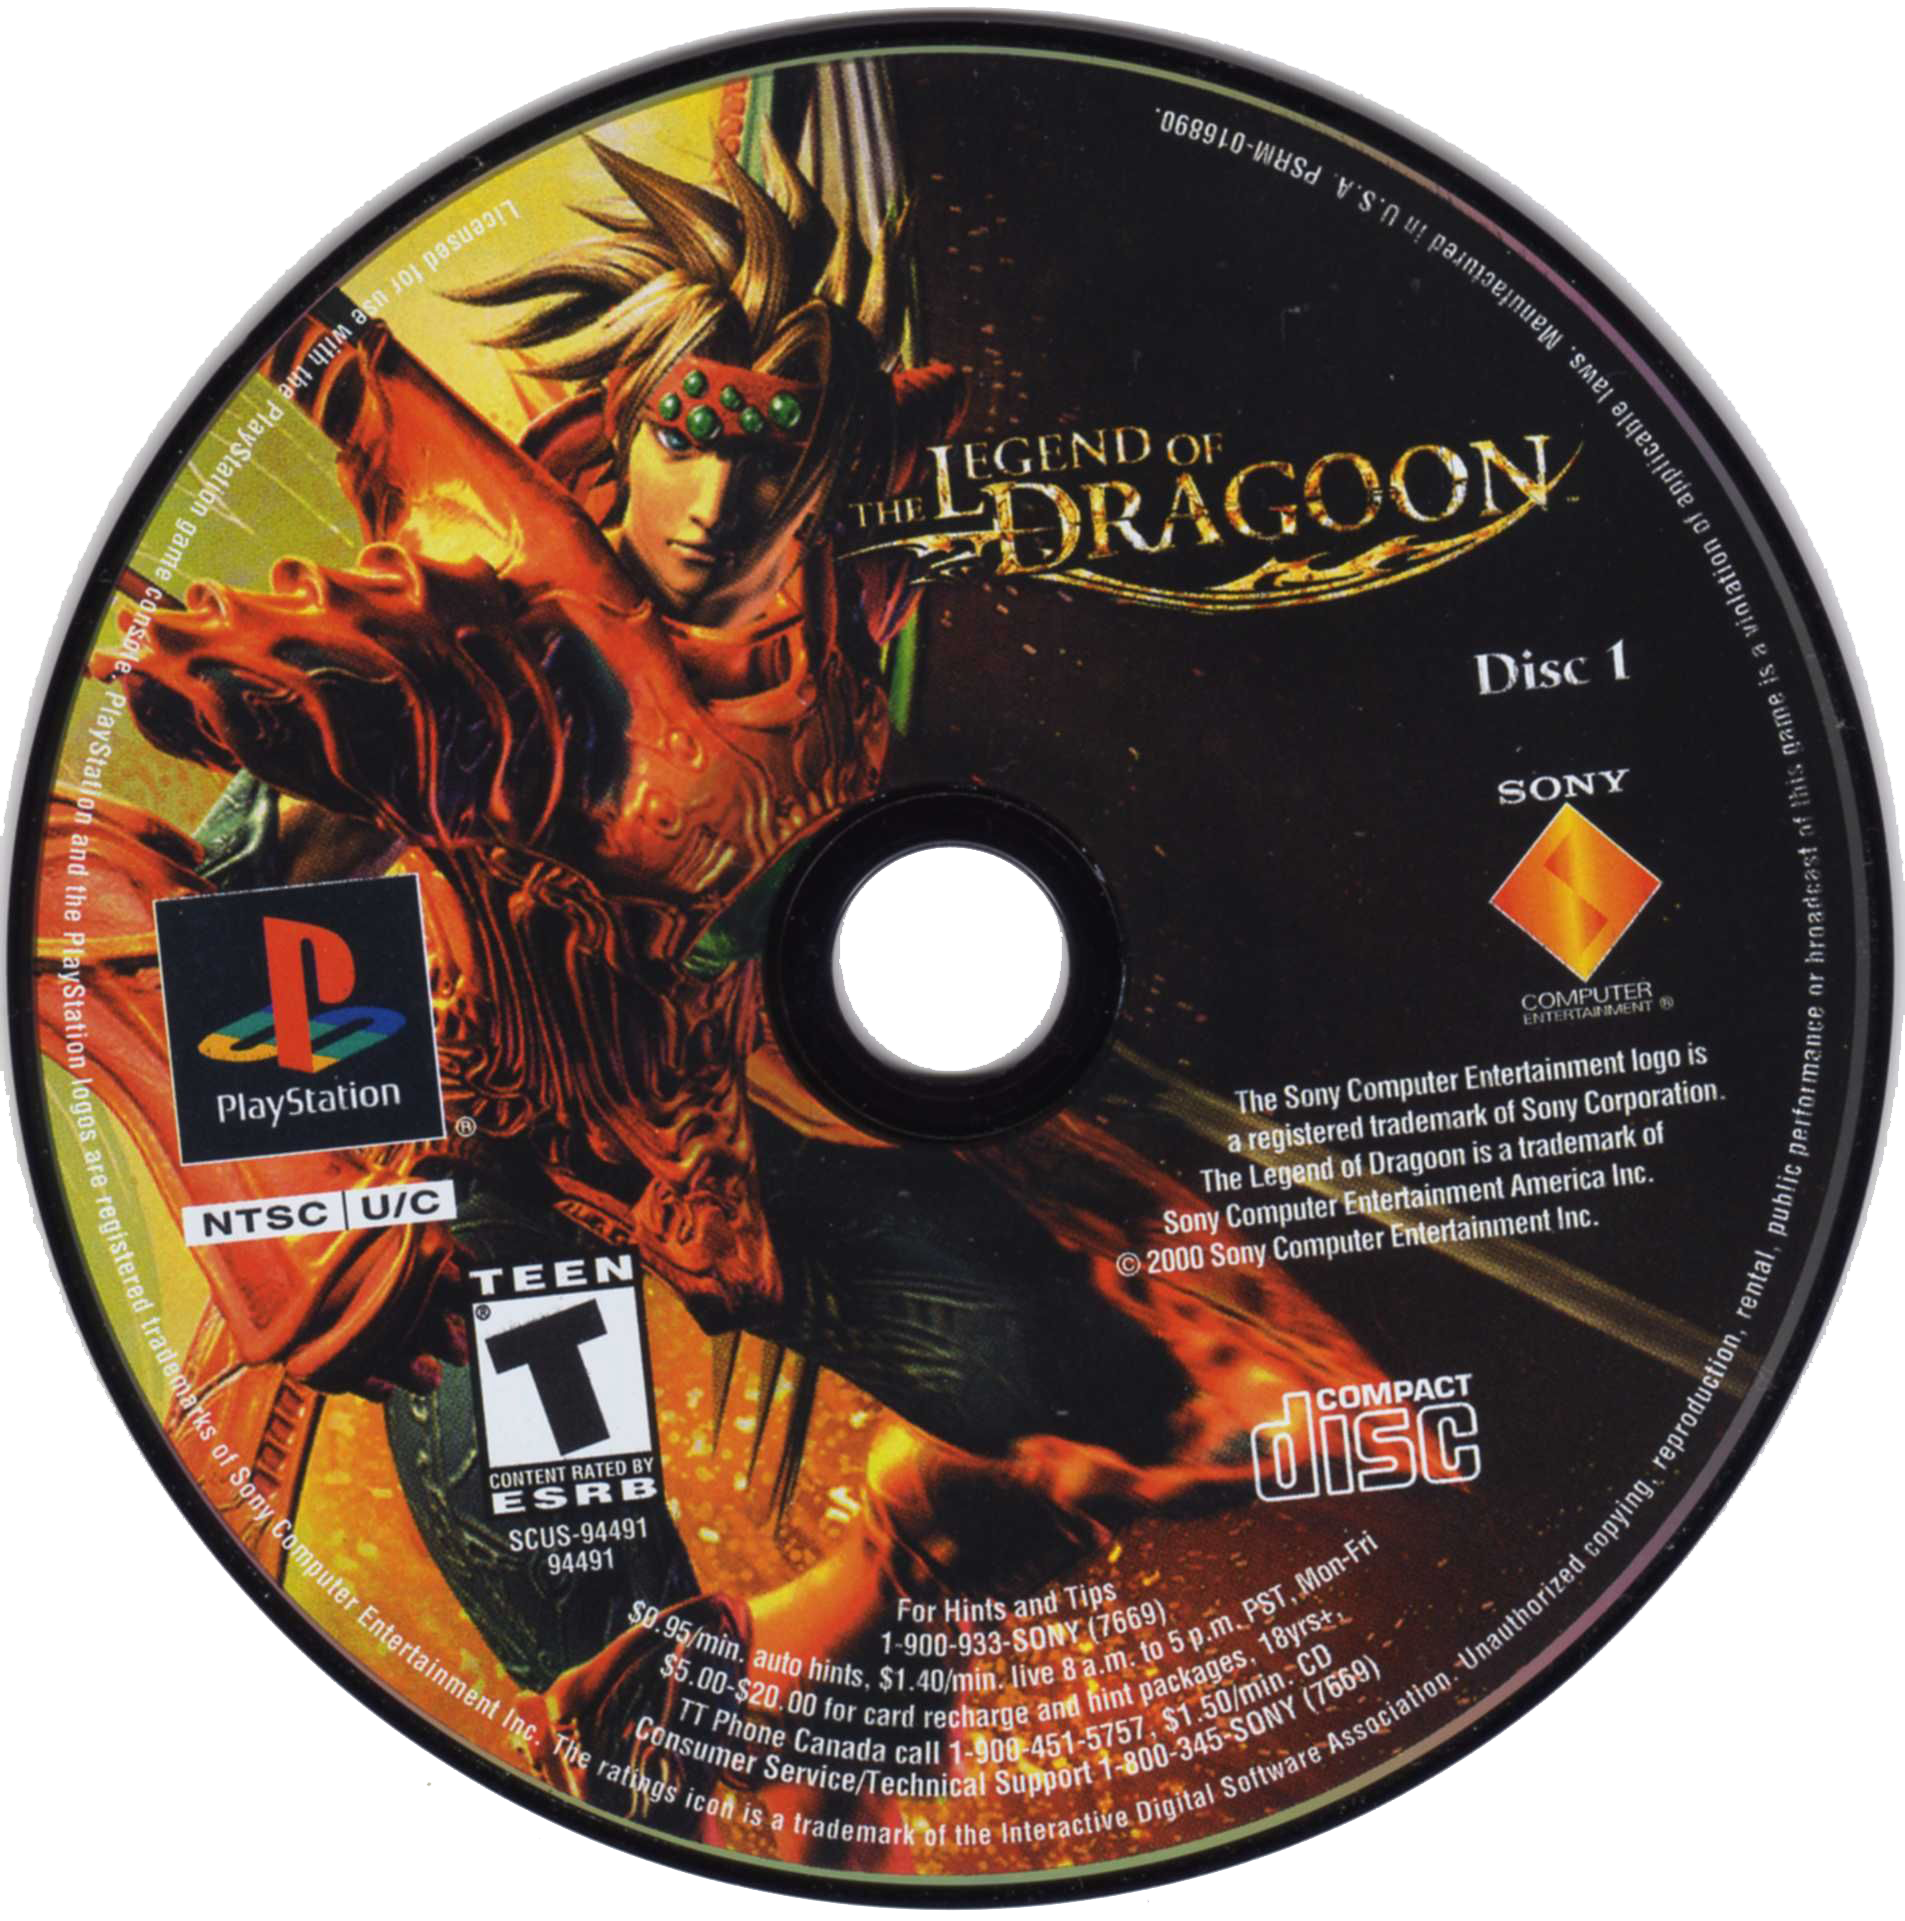 The Legend of Dragoon - PlayStation 1 (PS1) Game